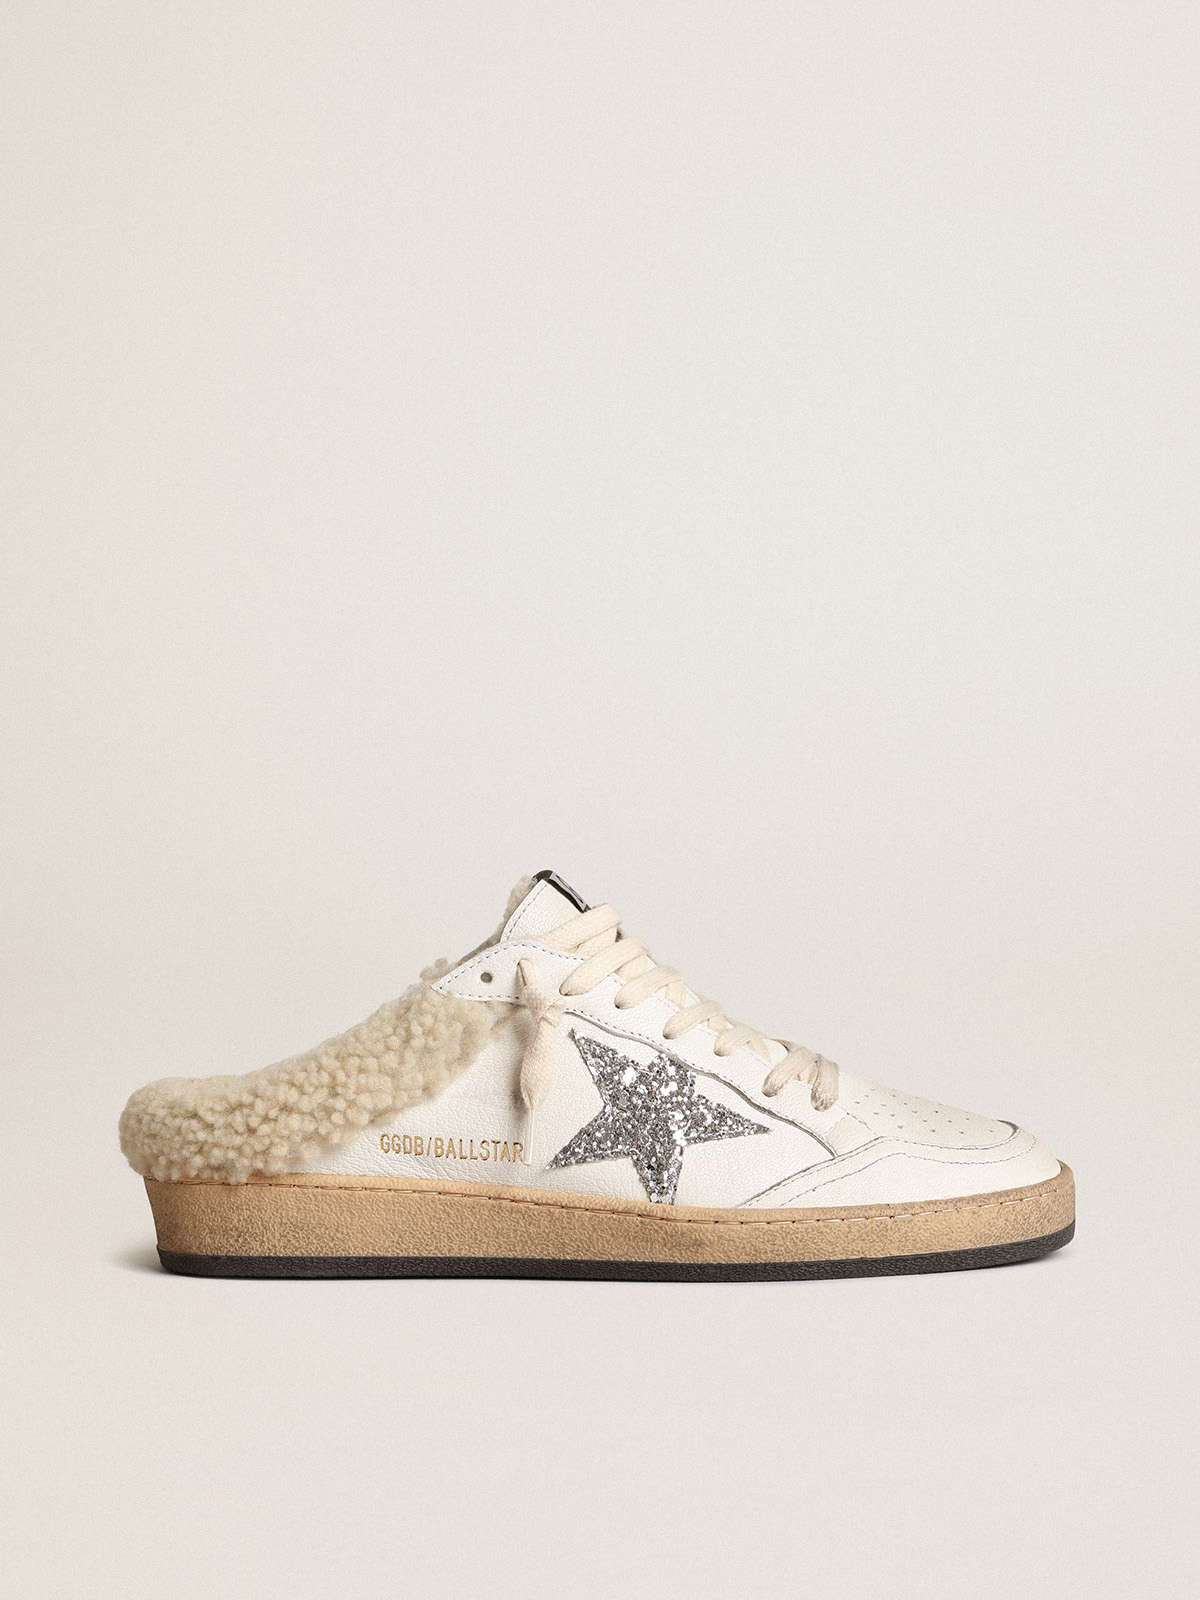 Ball Star Sabots with glitter star and shearling lining | Golden Goose